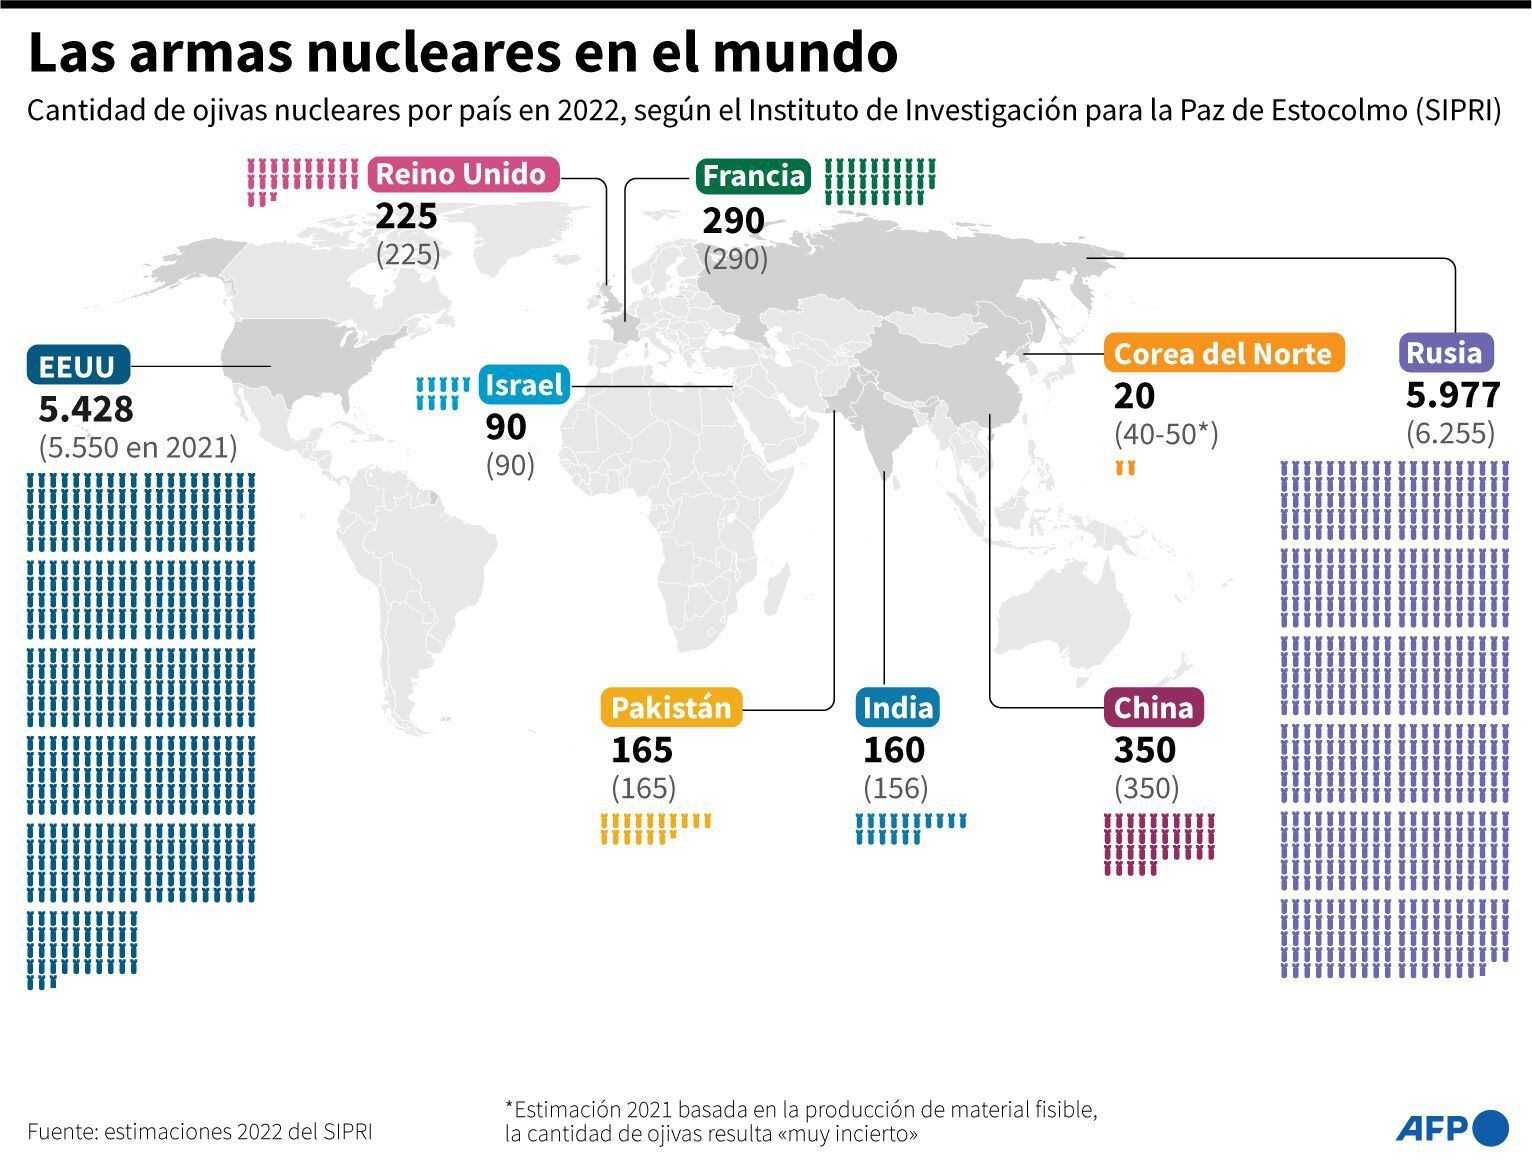 Nuclear weapons in the world: (AFP).